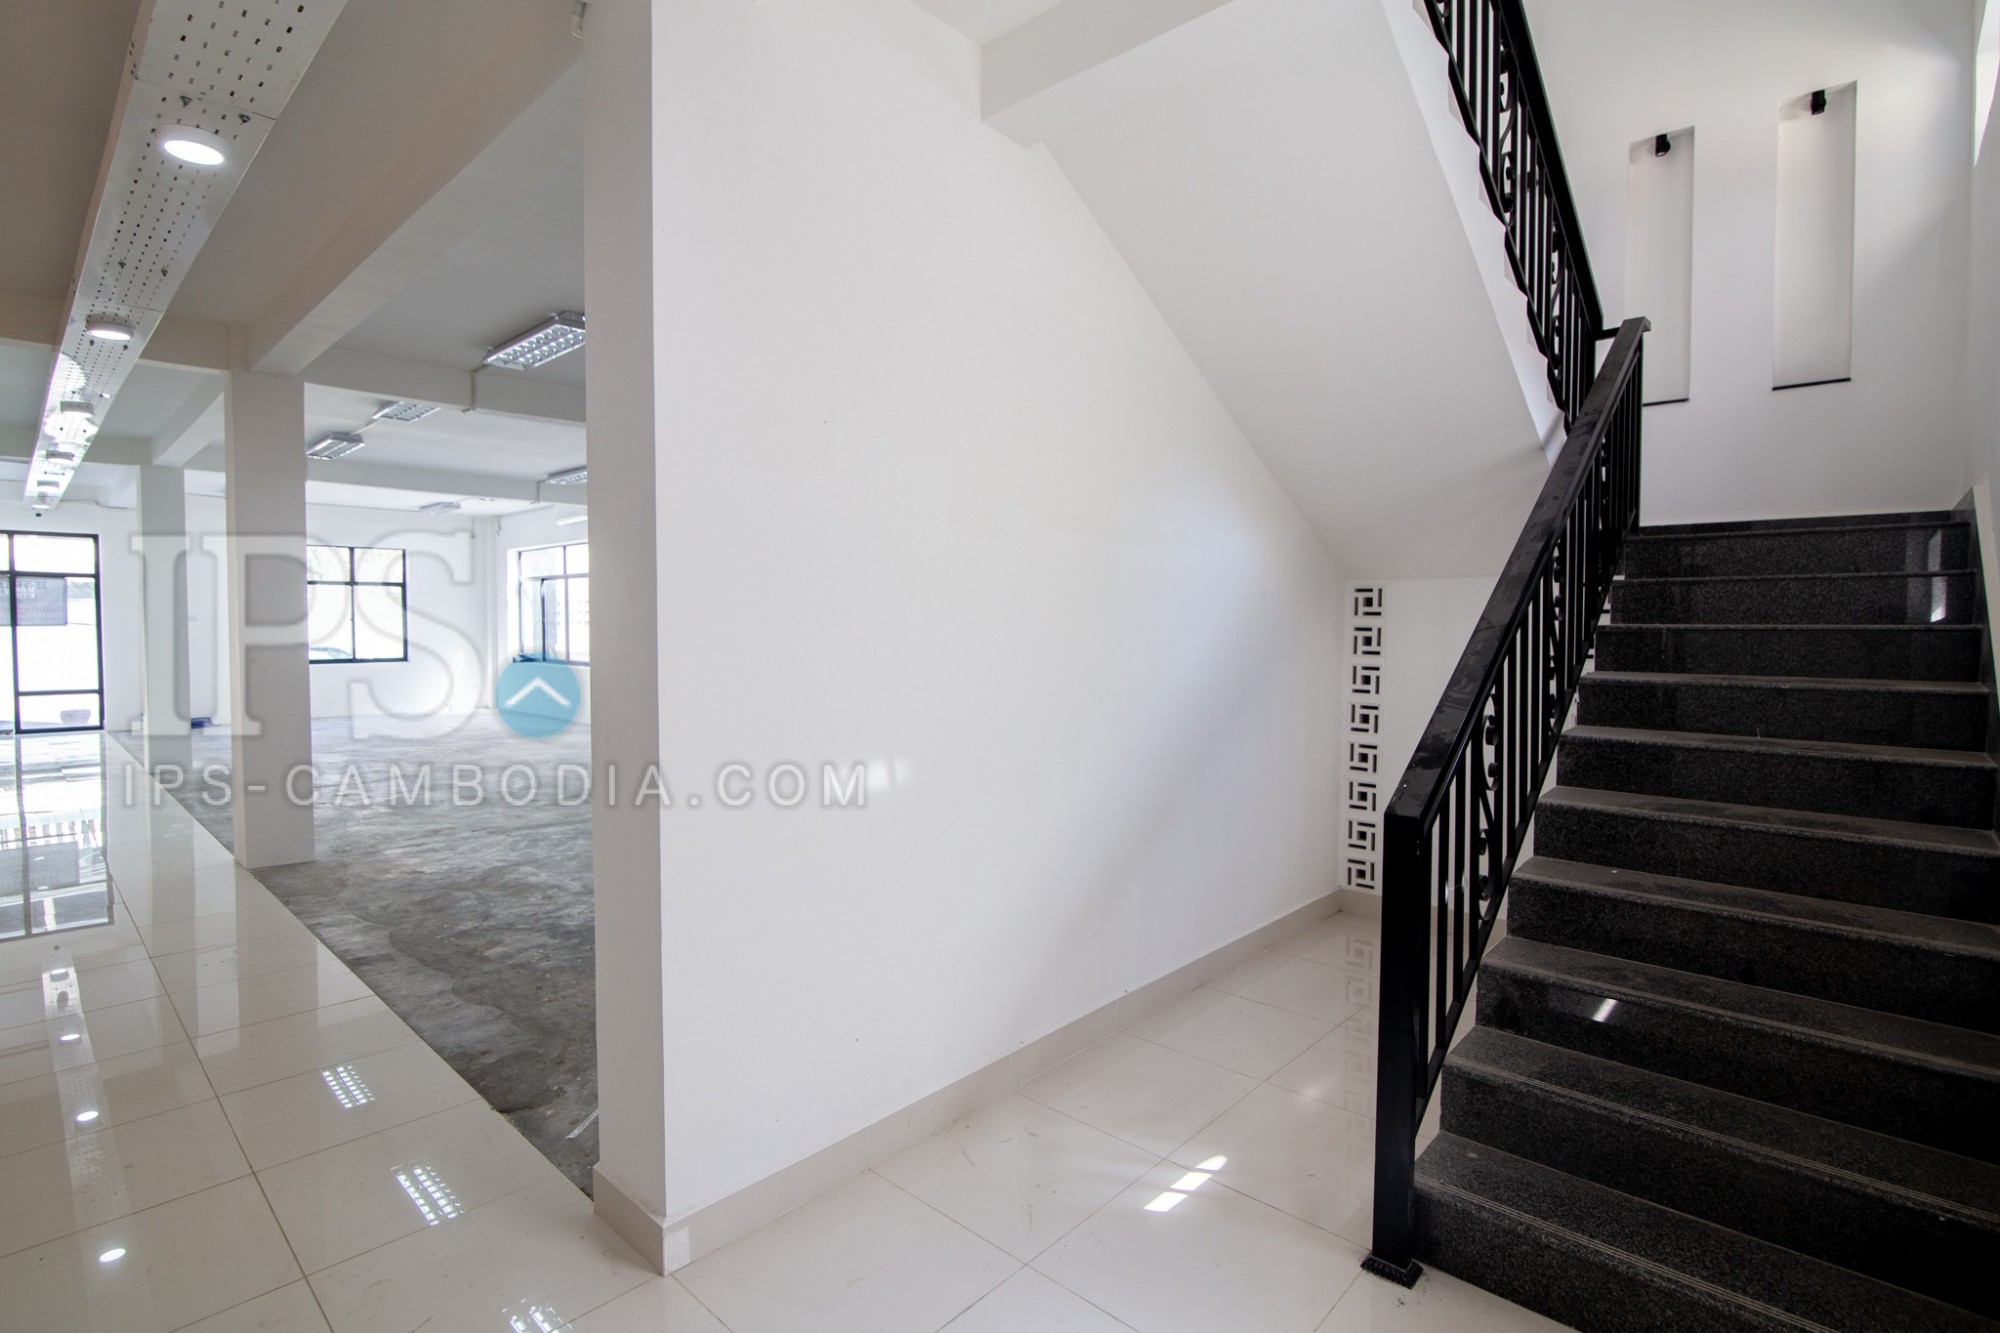 189 Sqm Office Space For Rent - Russian Market, Toul Tum Poung 2, Phnom Penh